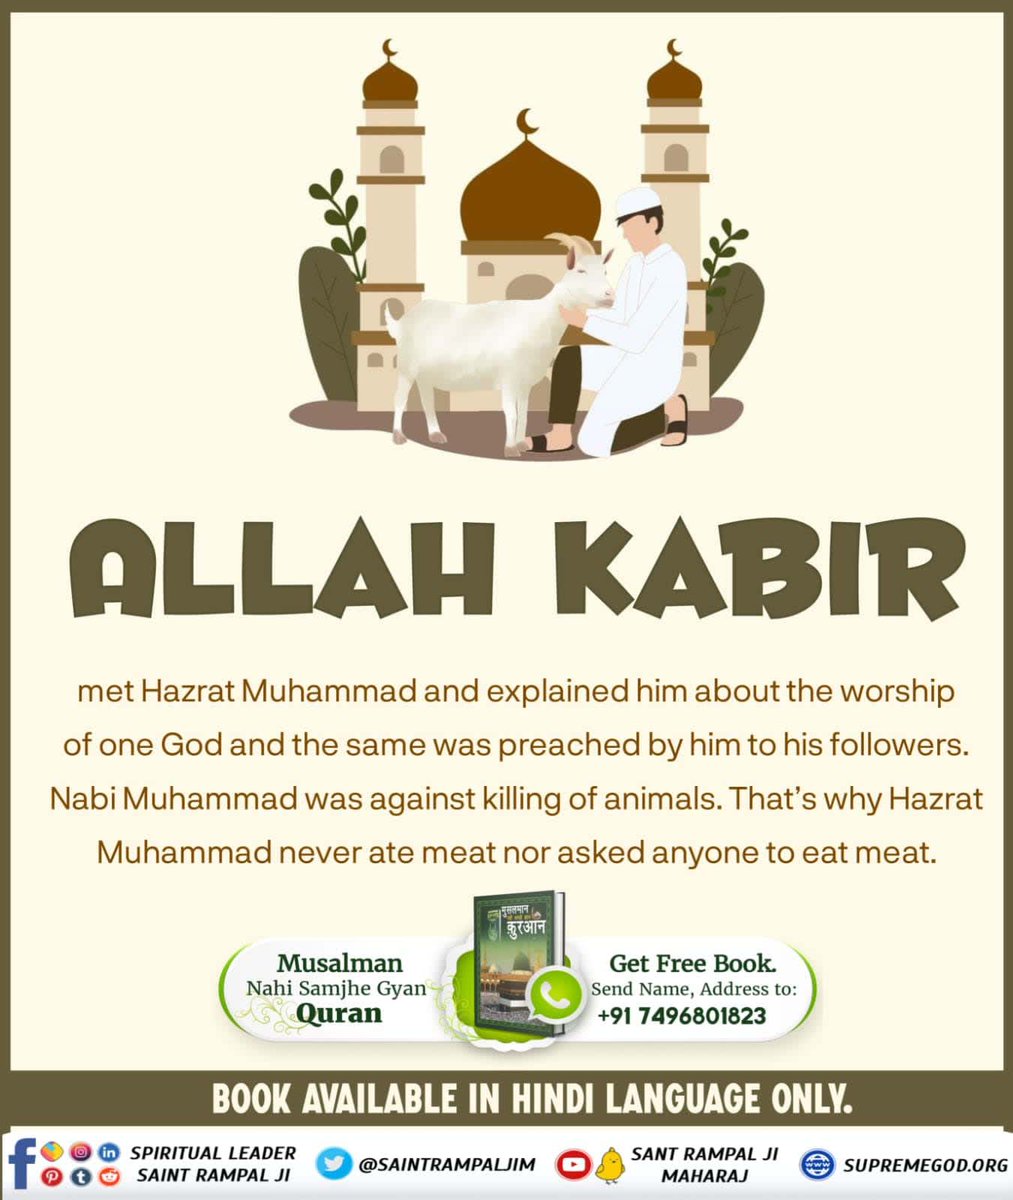 #GodMorningThursday

ALLAH KABIR met Hazrat Muhammad and explained him about the worship of one God and the same was preached by him to his followers. Nabi Muhammad was against killing of animals.

- #रहम_करो_मूक_जीवों_पर 
#SantRampalJiQuotes